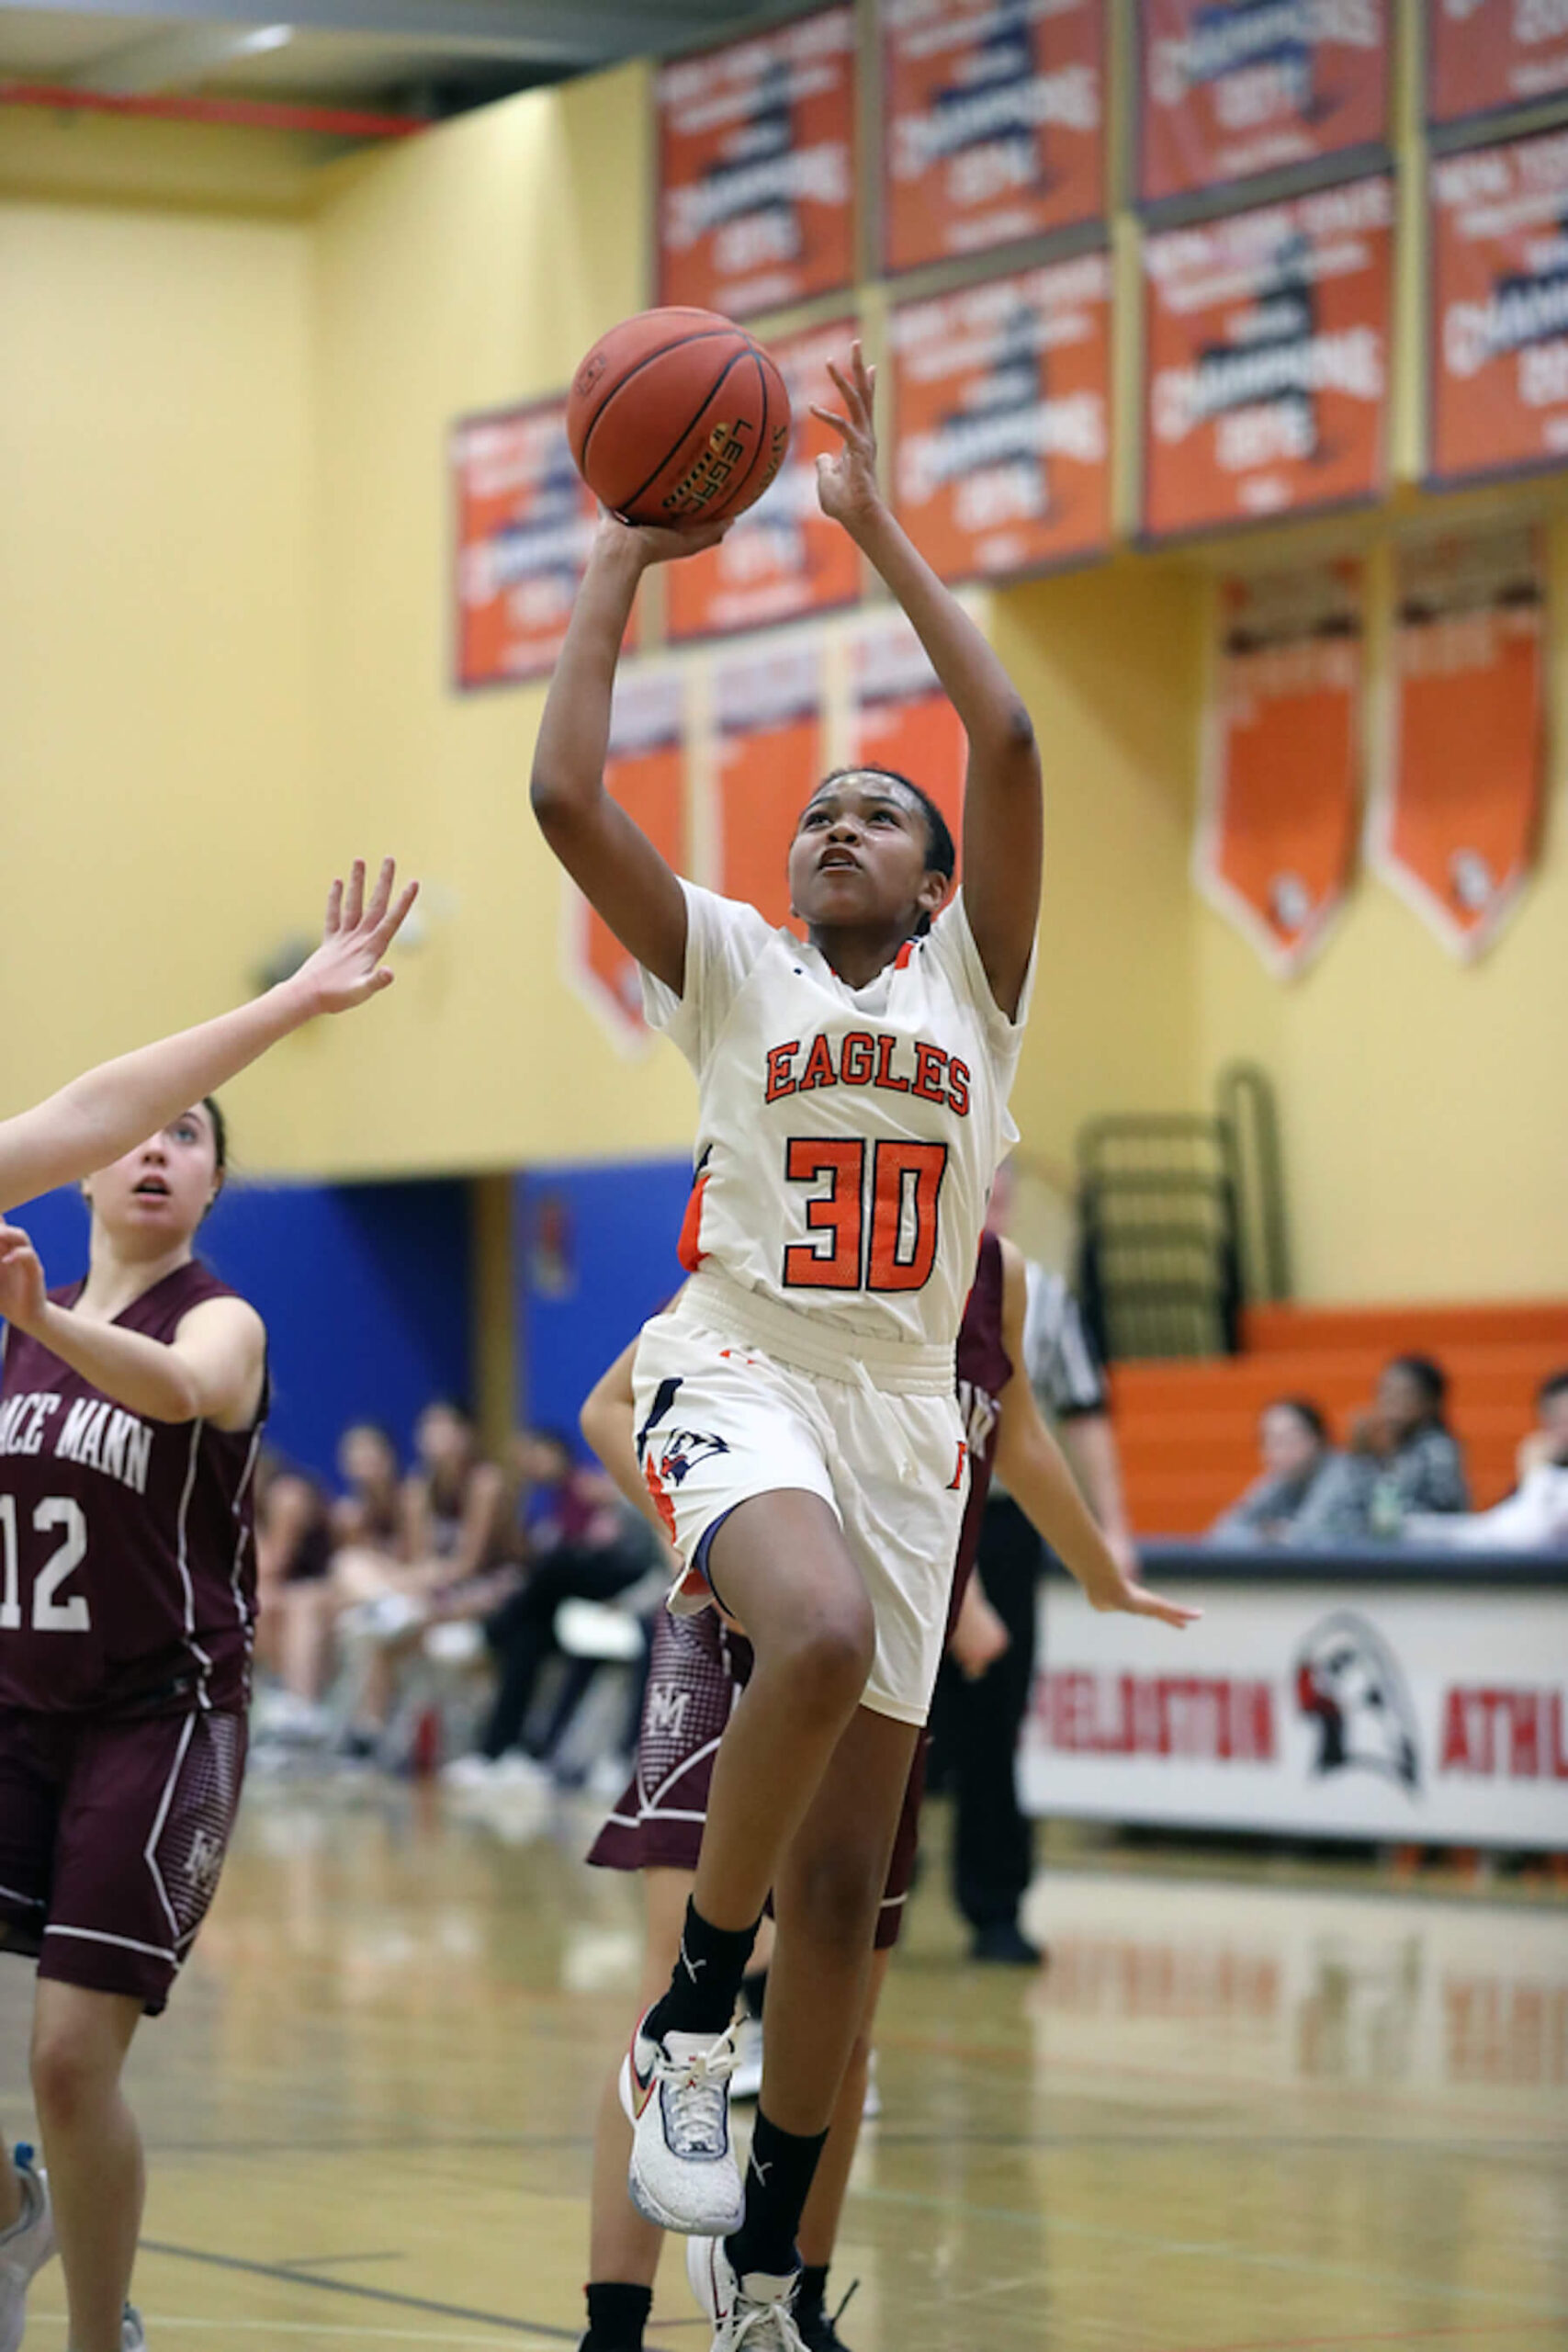 Fieldston Upper girls varsity basketball player goes up for a layup as two players on the opposing team follow close behind.